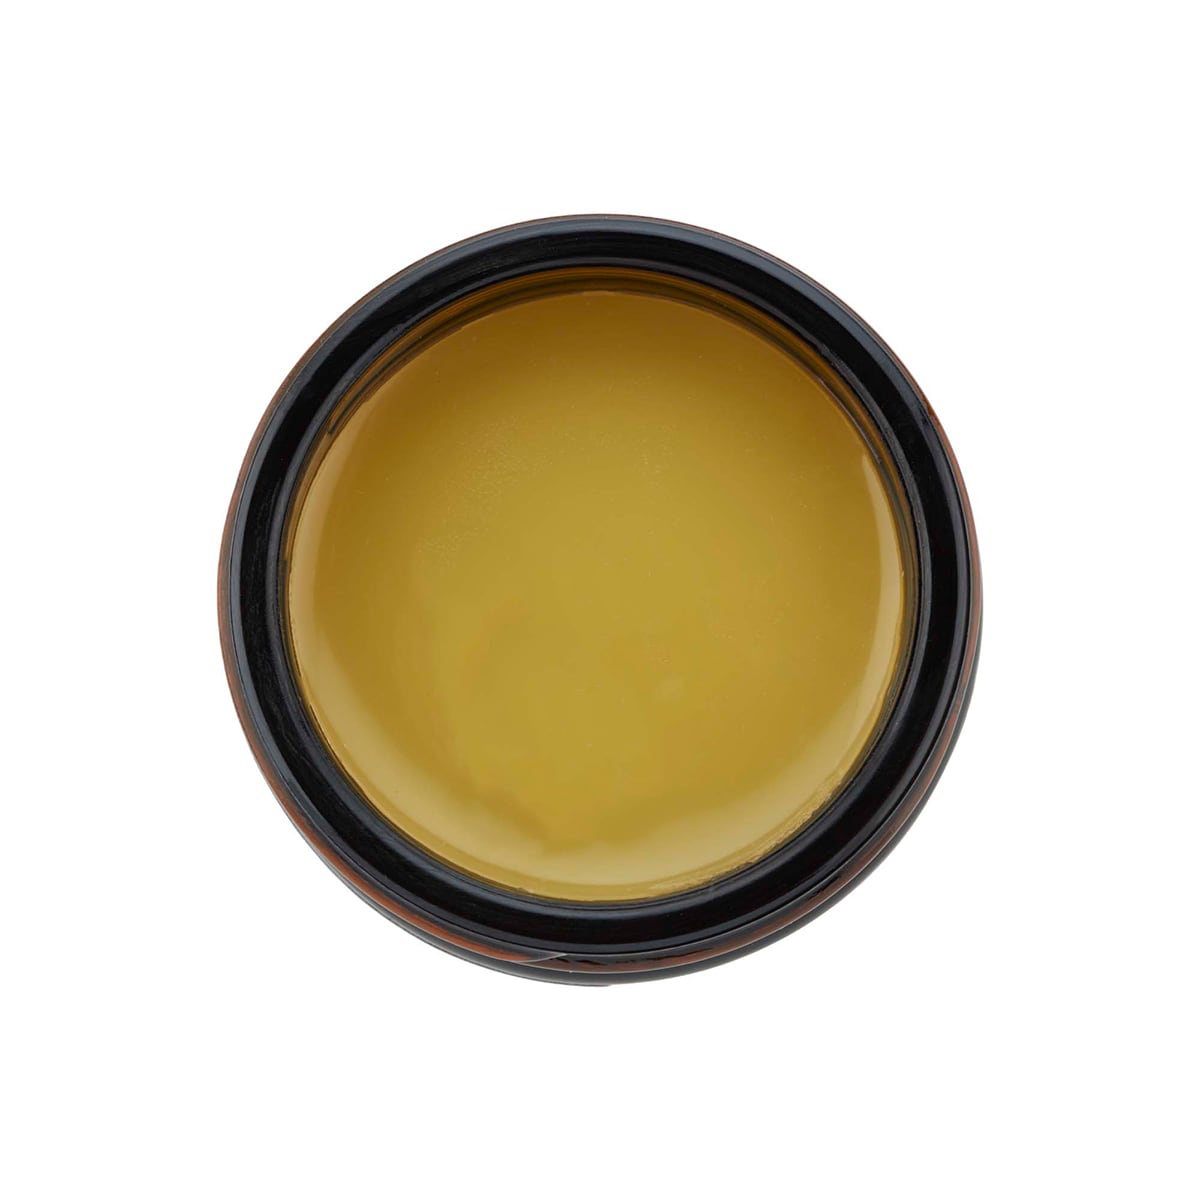 Joint and Muscle Balm | For Soothing Aches & Pains